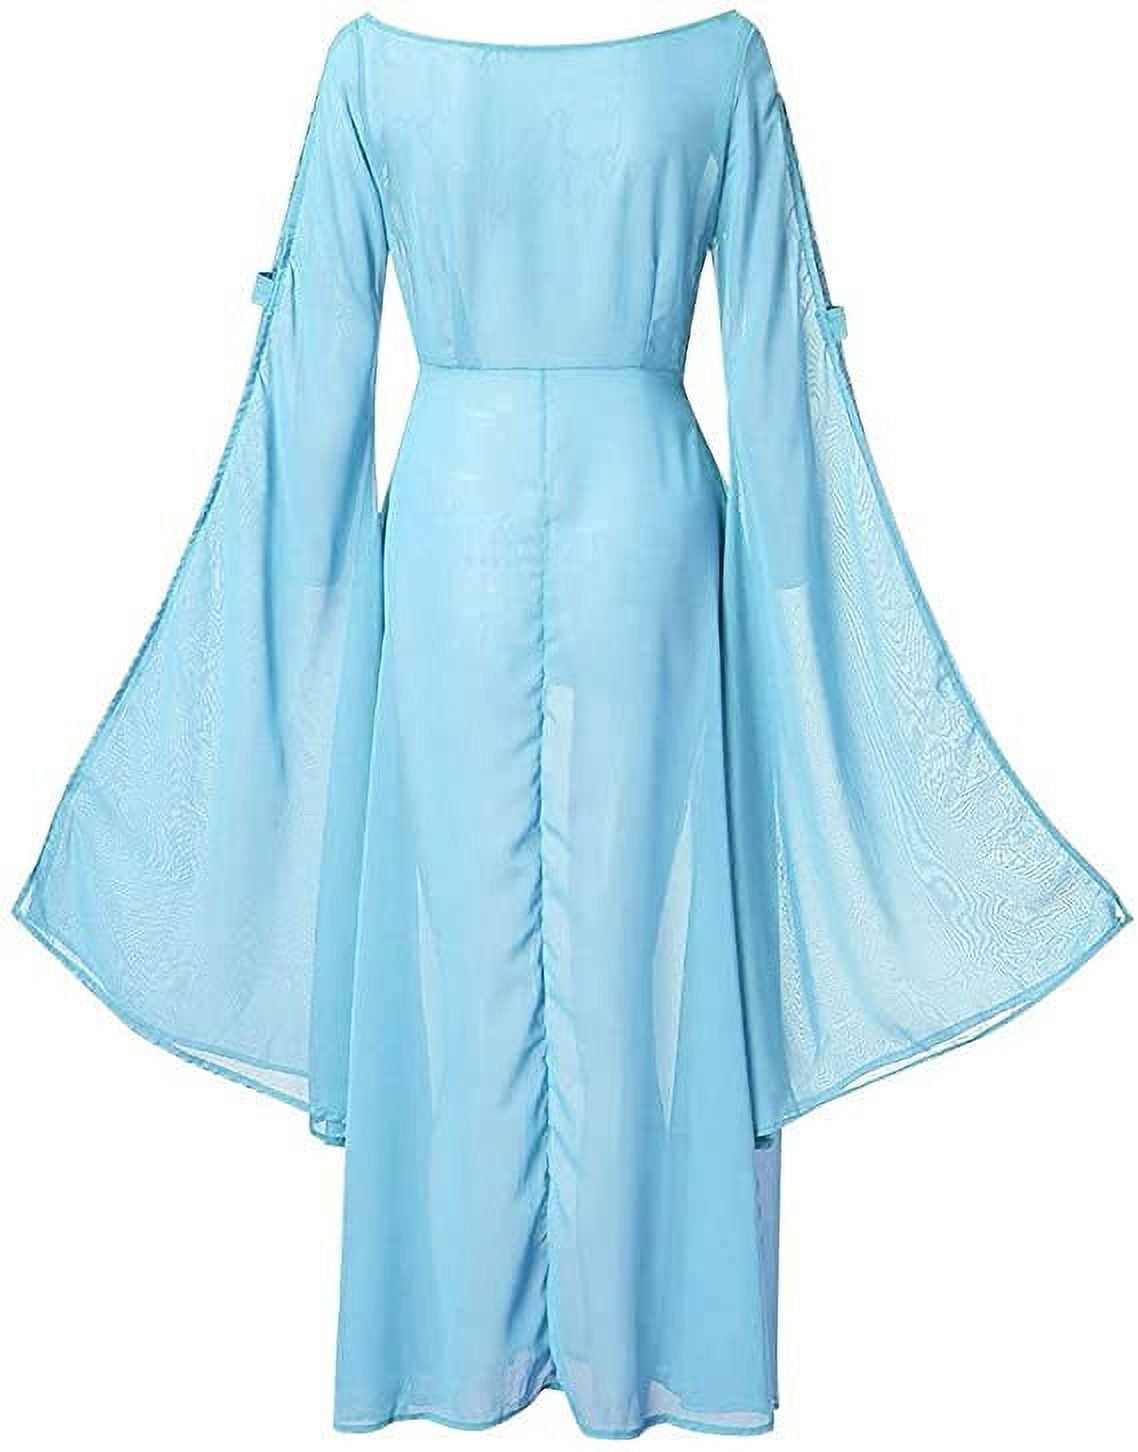 Fatuov Sexy Gothic Clothes for Women Solid Color Sexy Blue Dress S 